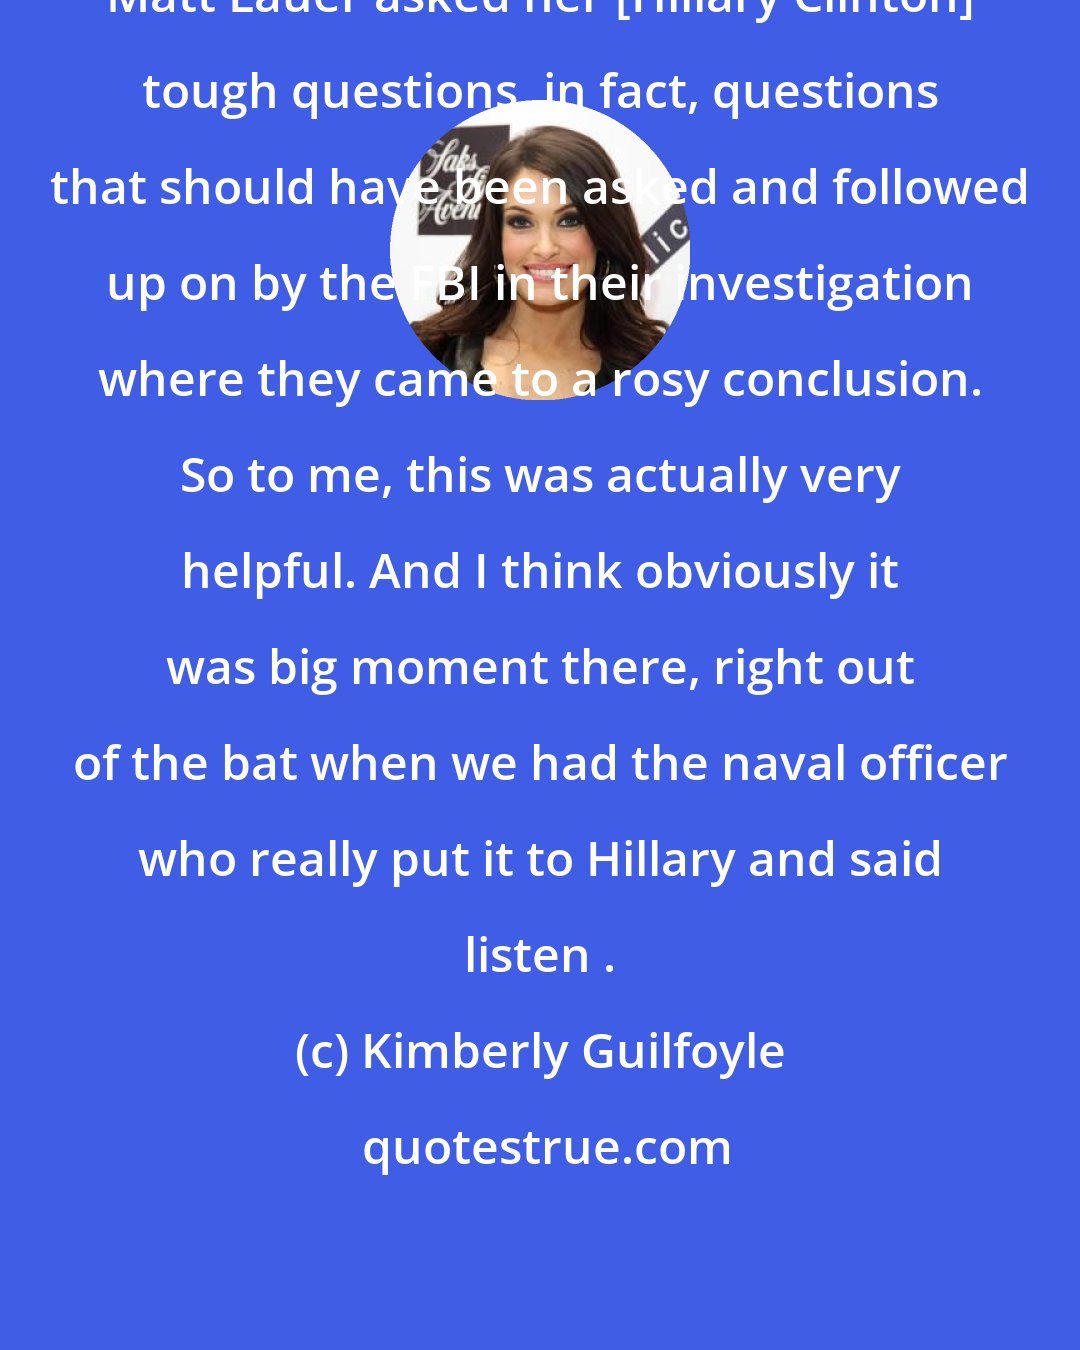 Kimberly Guilfoyle: Matt Lauer asked her [Hillary Clinton] tough questions, in fact, questions that should have been asked and followed up on by the FBI in their investigation where they came to a rosy conclusion. So to me, this was actually very helpful. And I think obviously it was big moment there, right out of the bat when we had the naval officer who really put it to Hillary and said listen .